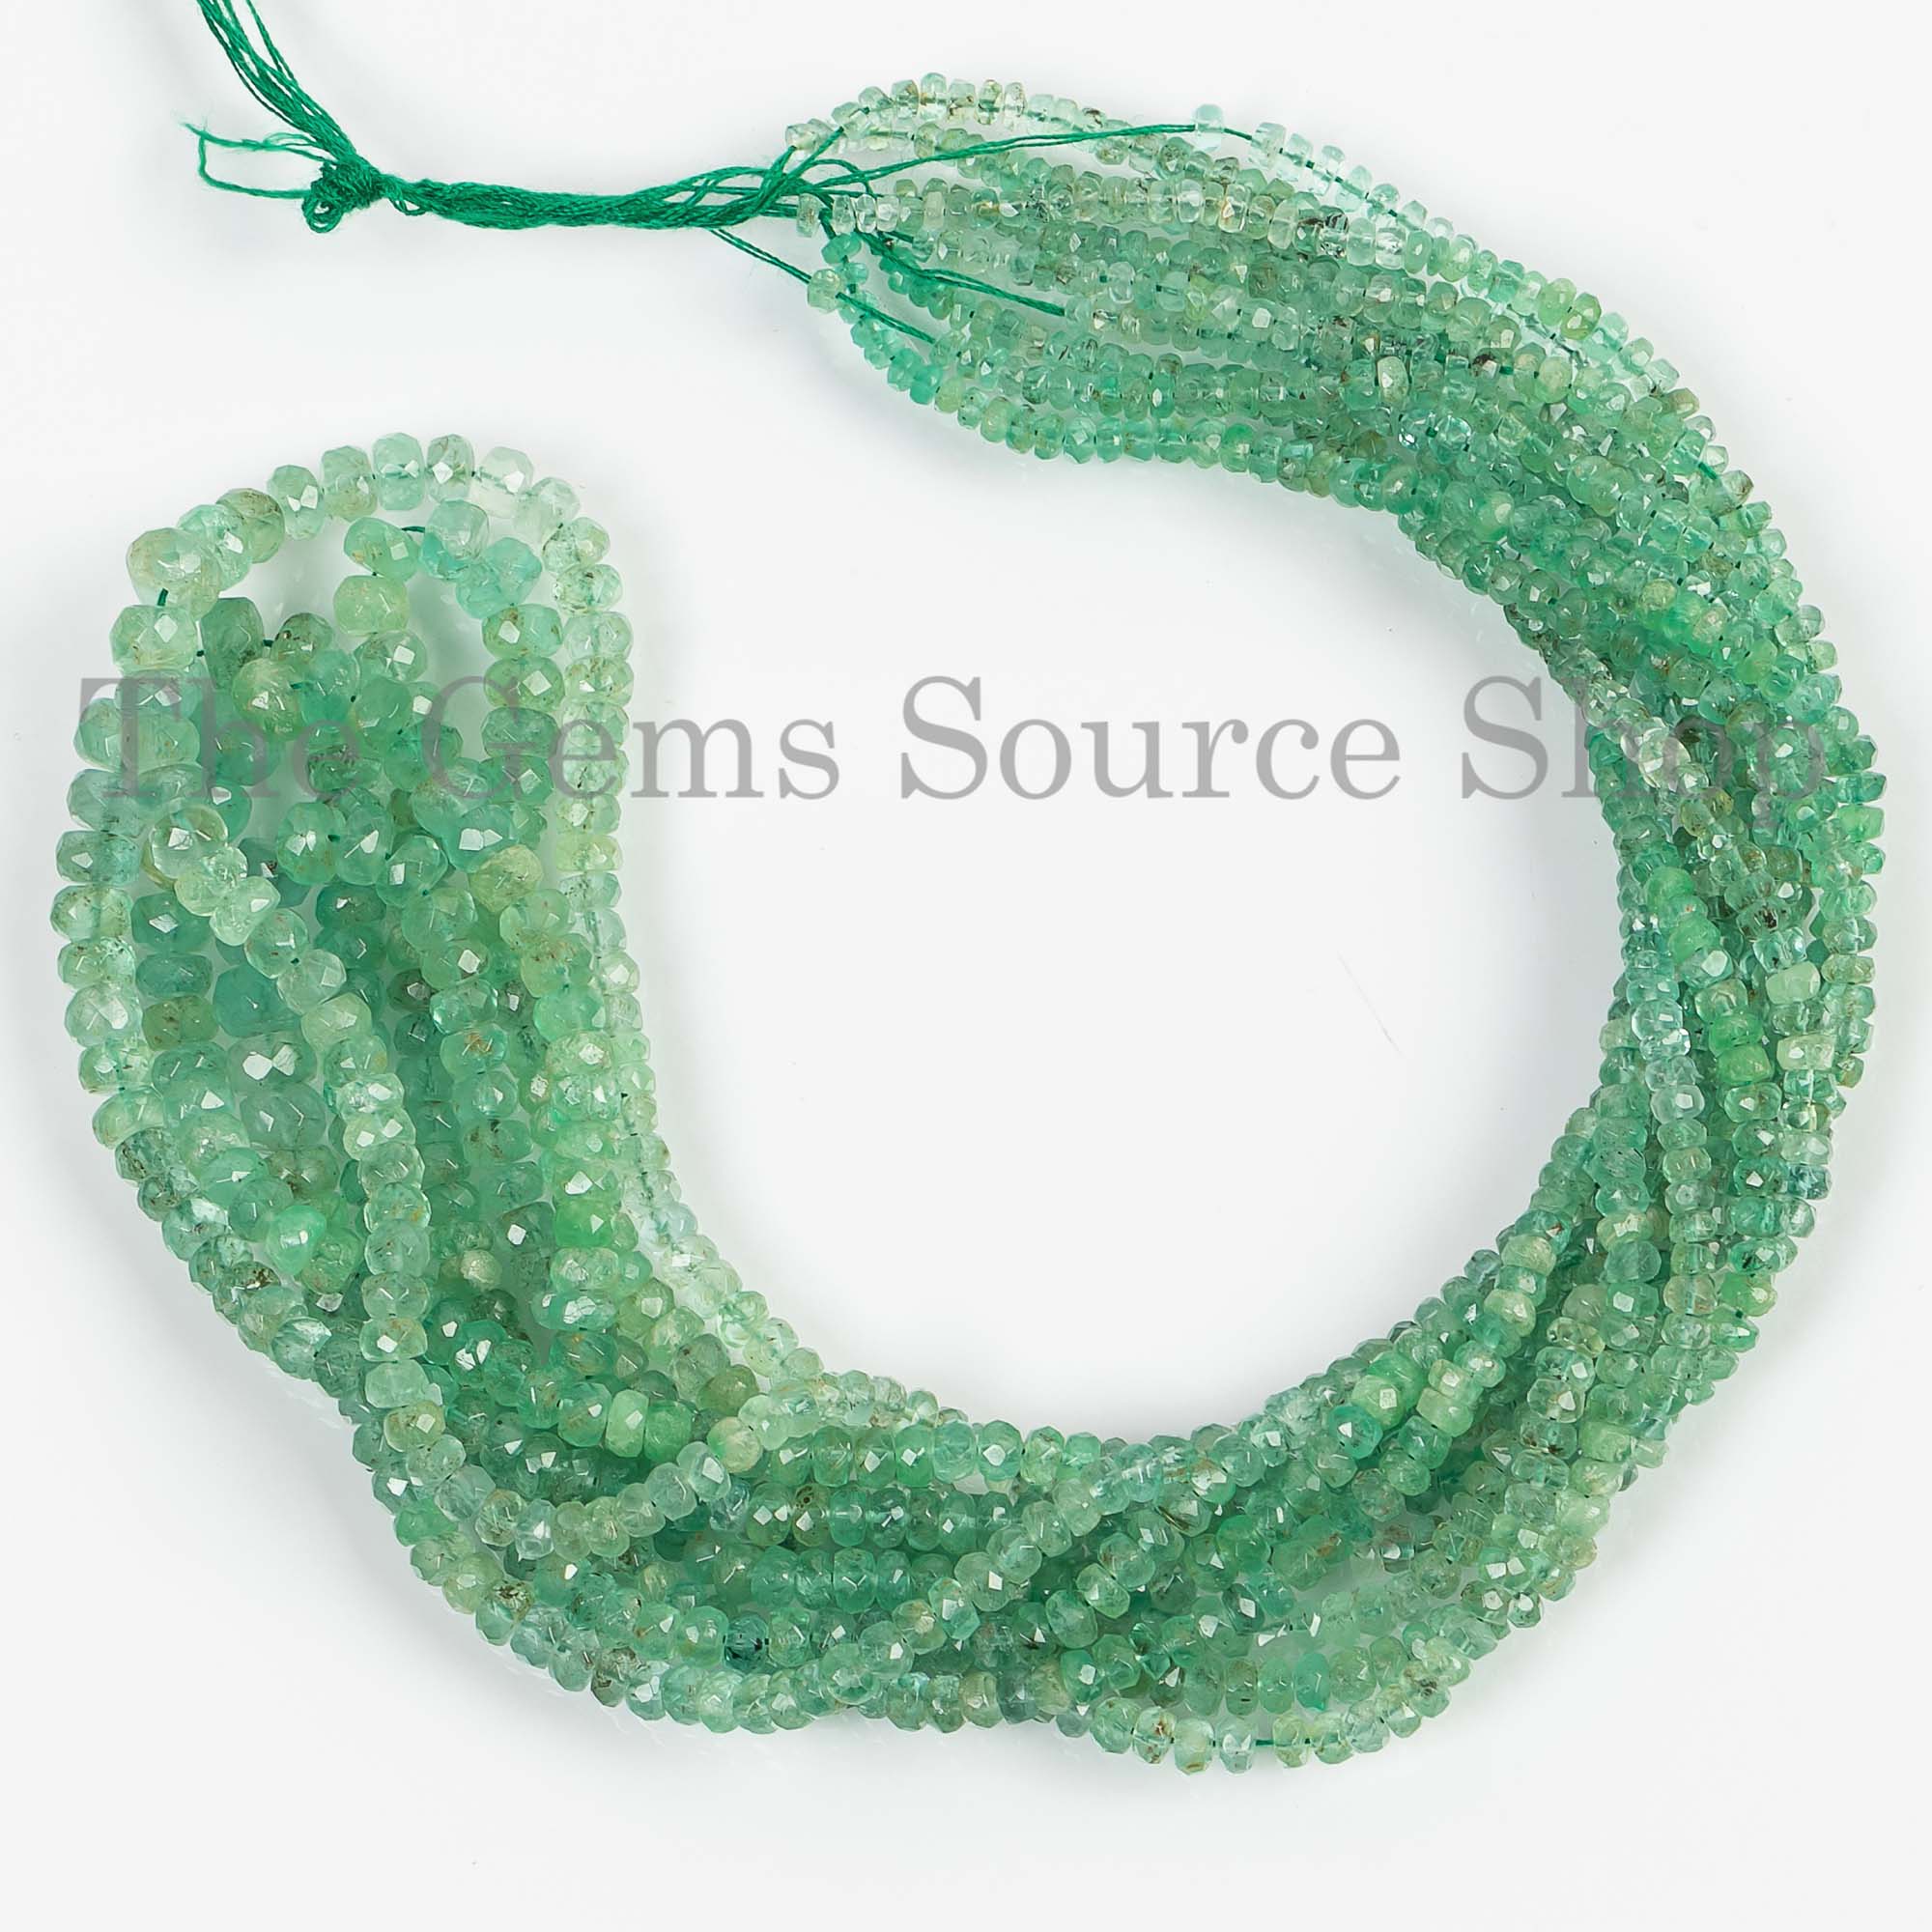 Natural Emerald Faceted Rondelle, 2.5-5mm Emerald Beads, Emerald Rondelle Beads, Faceted Rondelle, Gemstone Rondelle, Wholesale Loose Beads